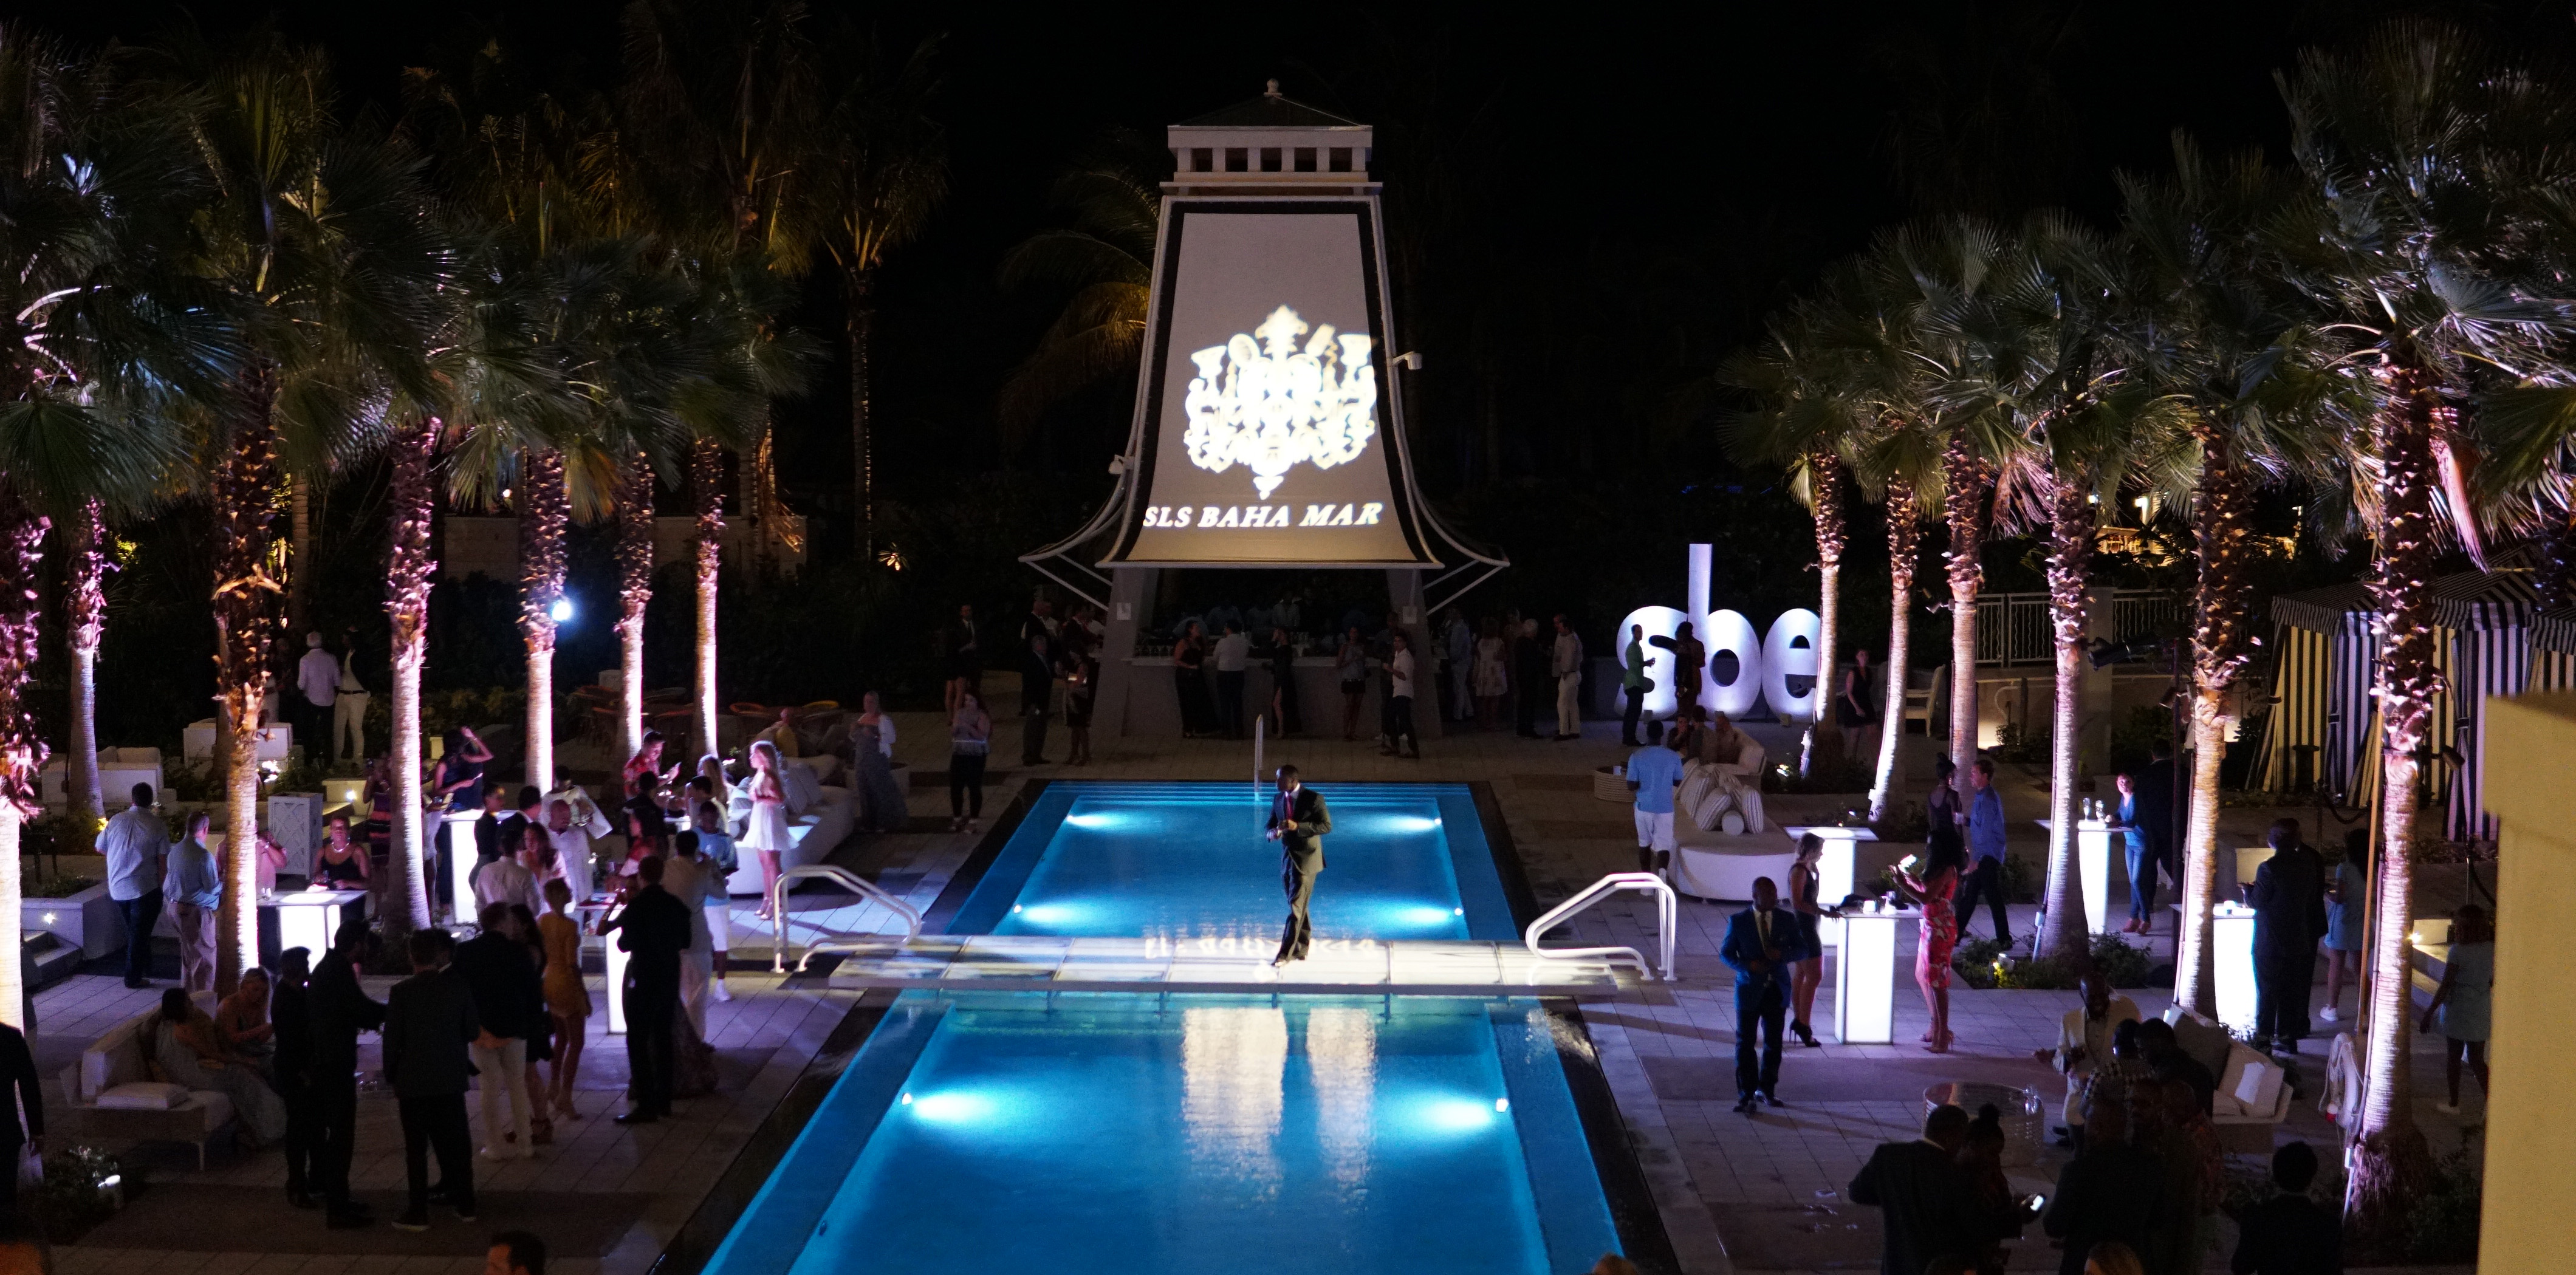 The SLS brand opens at Baha Mar in grand style